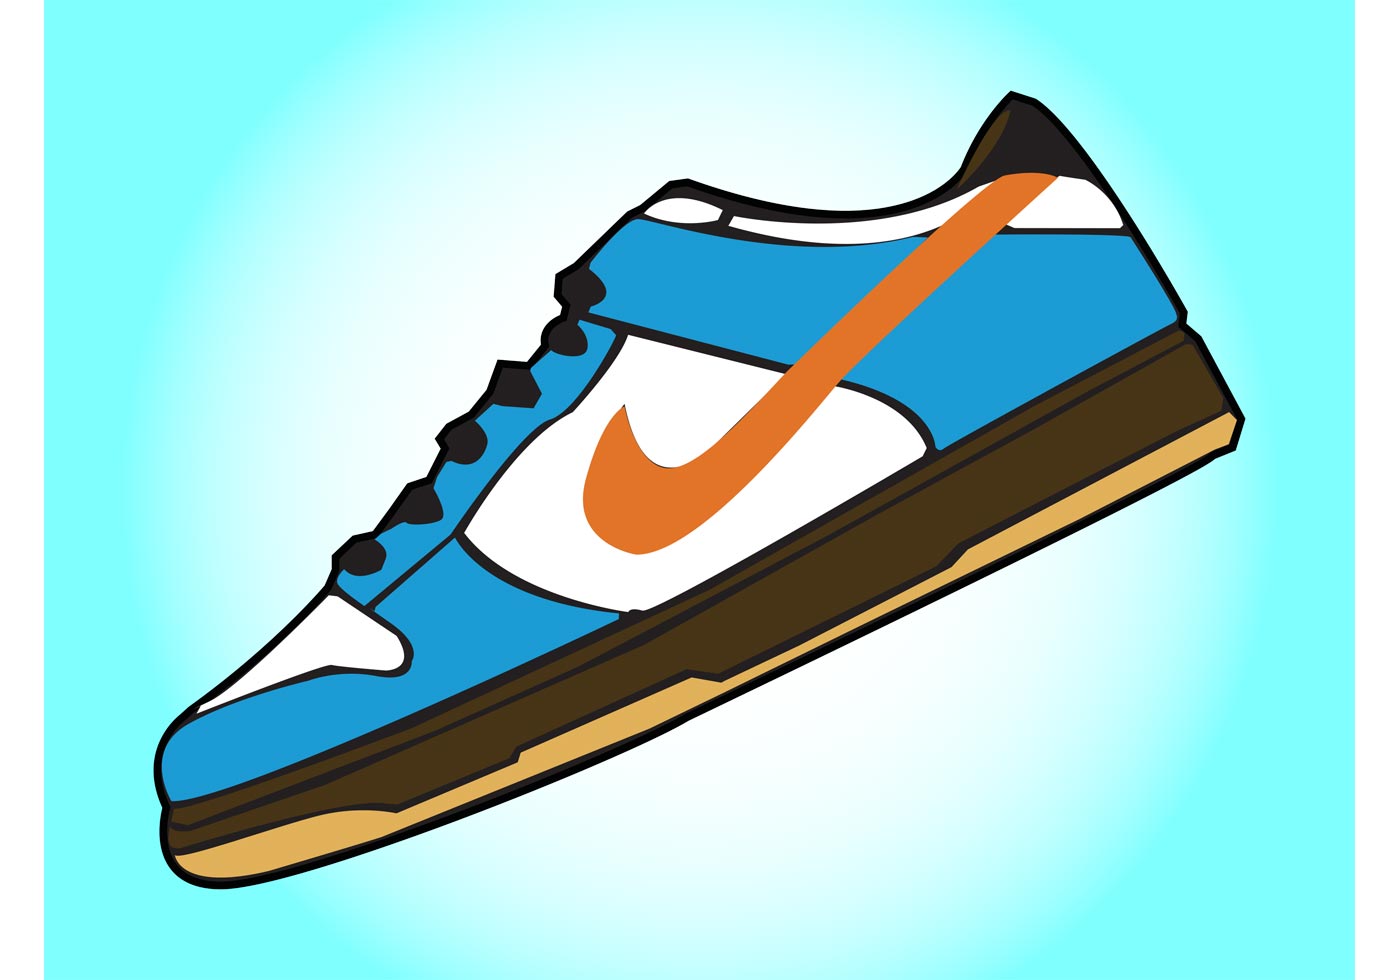 Nike Shoes Vector Download Free Vector Art, Stock